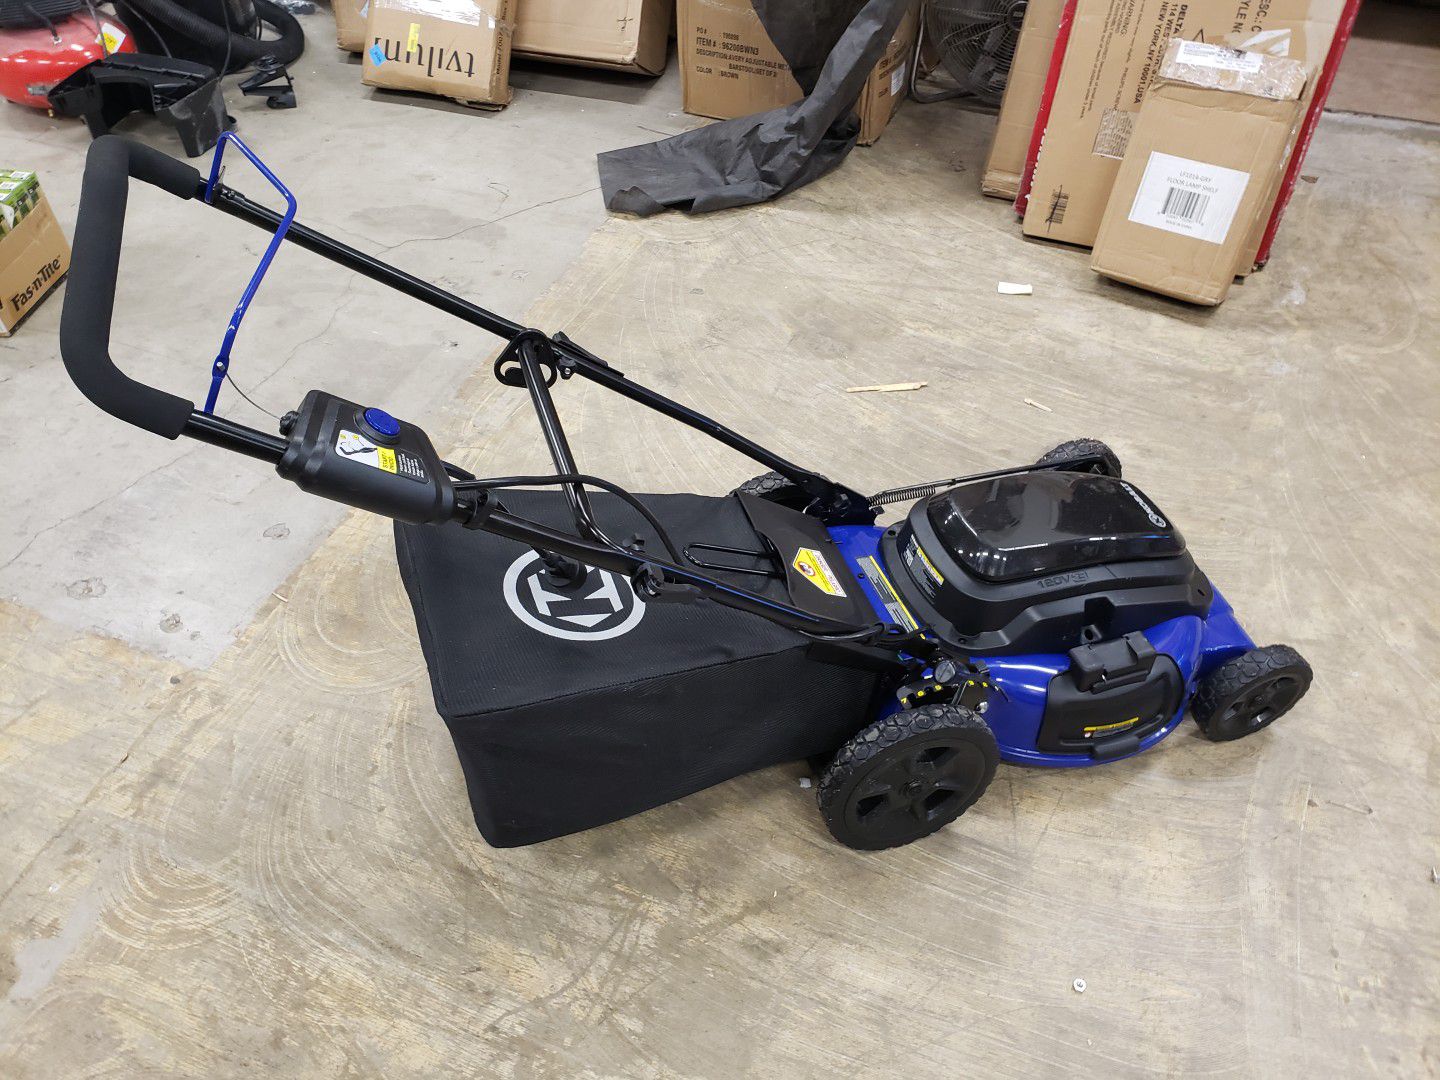 Kobalt corded electric lawn mower. Plugs into extension cord. $120